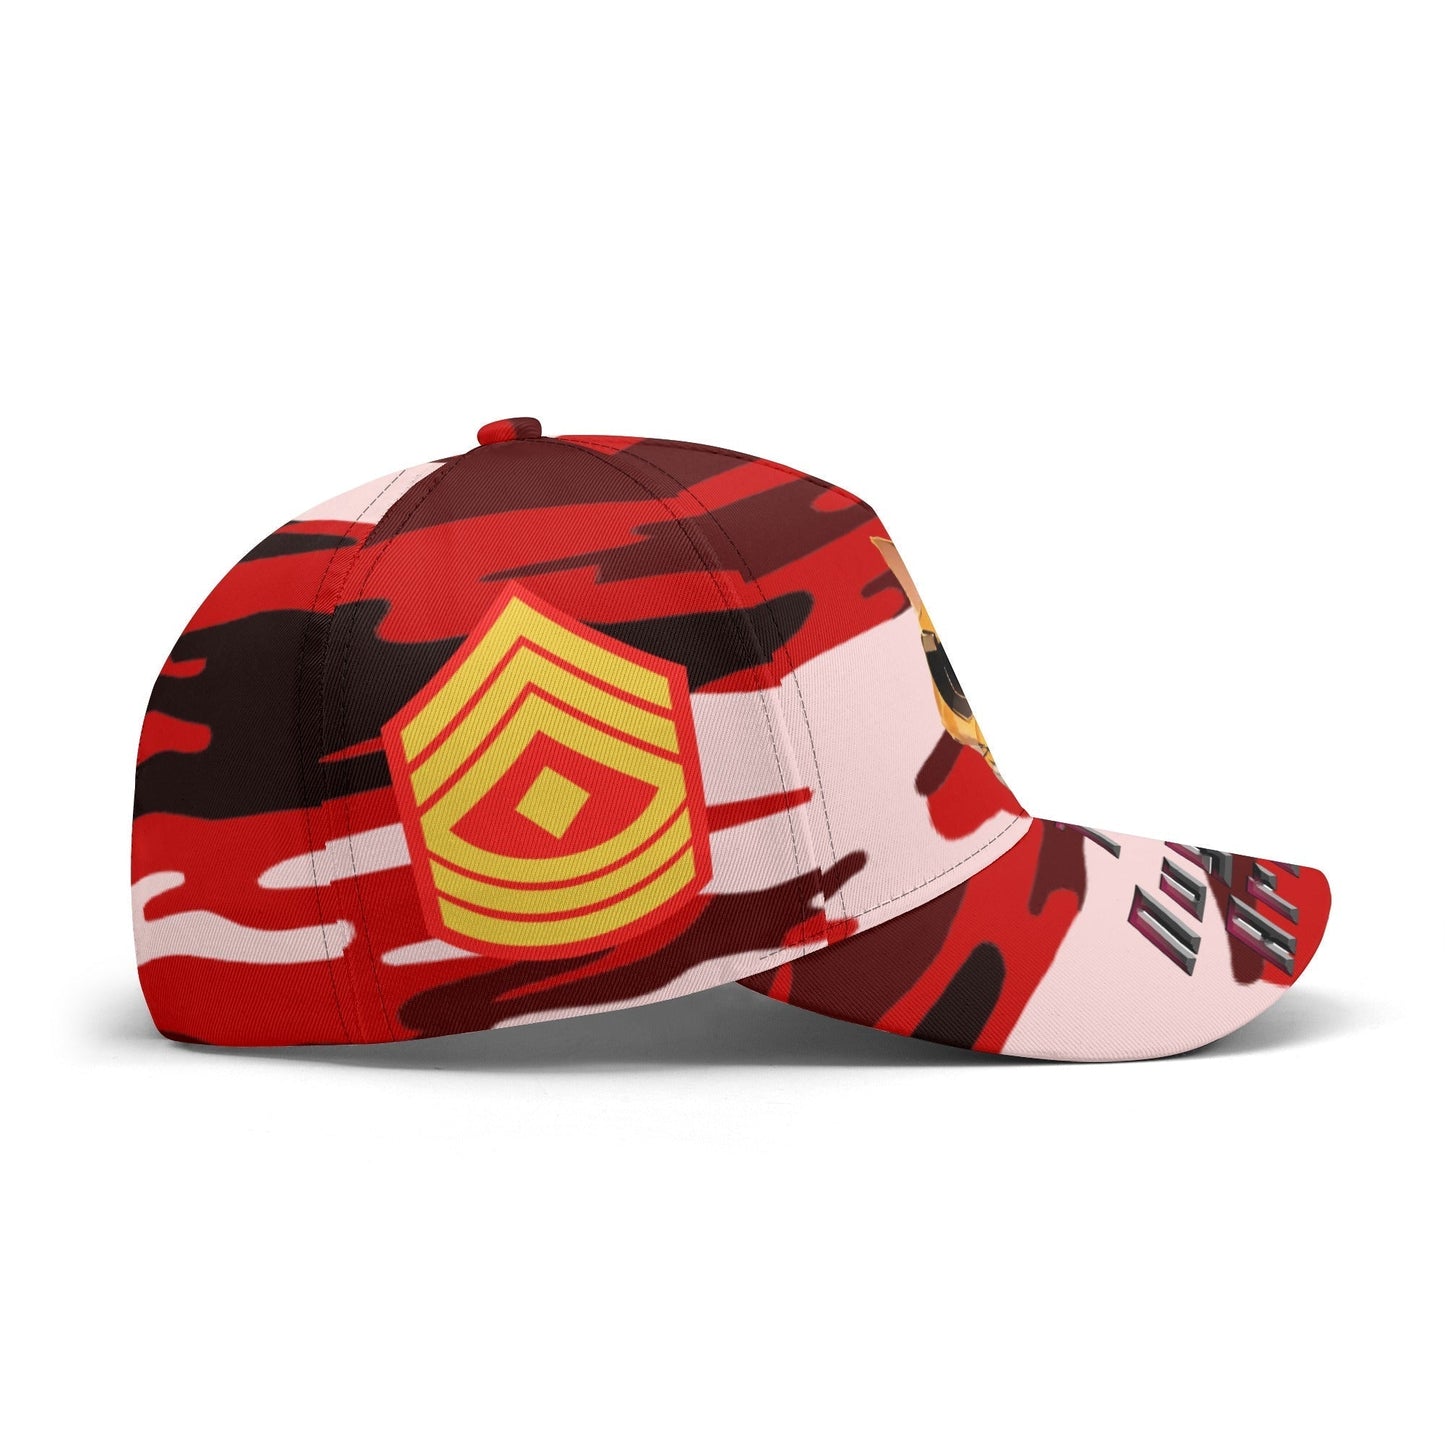 Stand out  with the  Nugget Army Baseball Caps  available at Hey Nugget. Grab yours today!